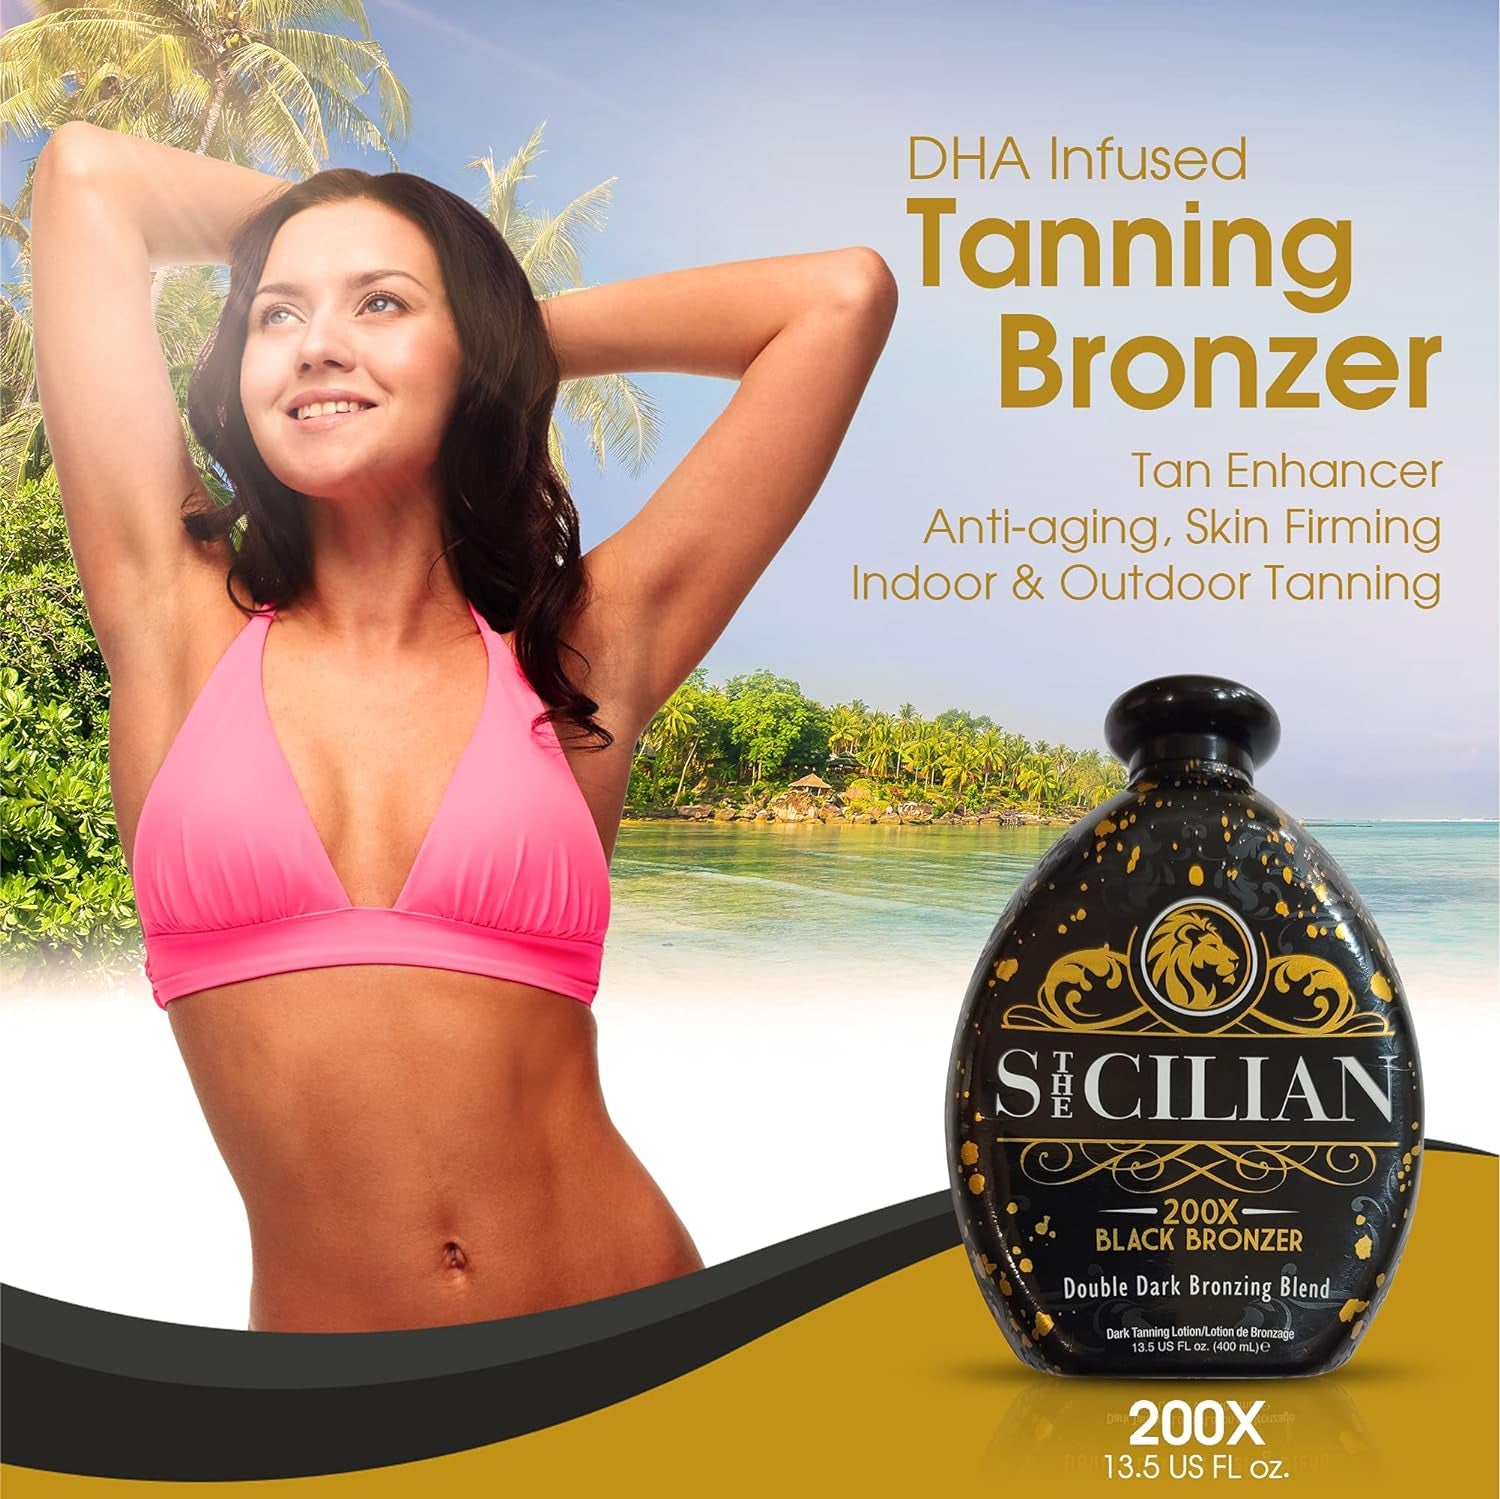 "Radiant Glow 200X Dark Black Bronzer Tanning Lotion - Ultimate Skin Nourishment for a Luxurious Sun-Kissed Tan"